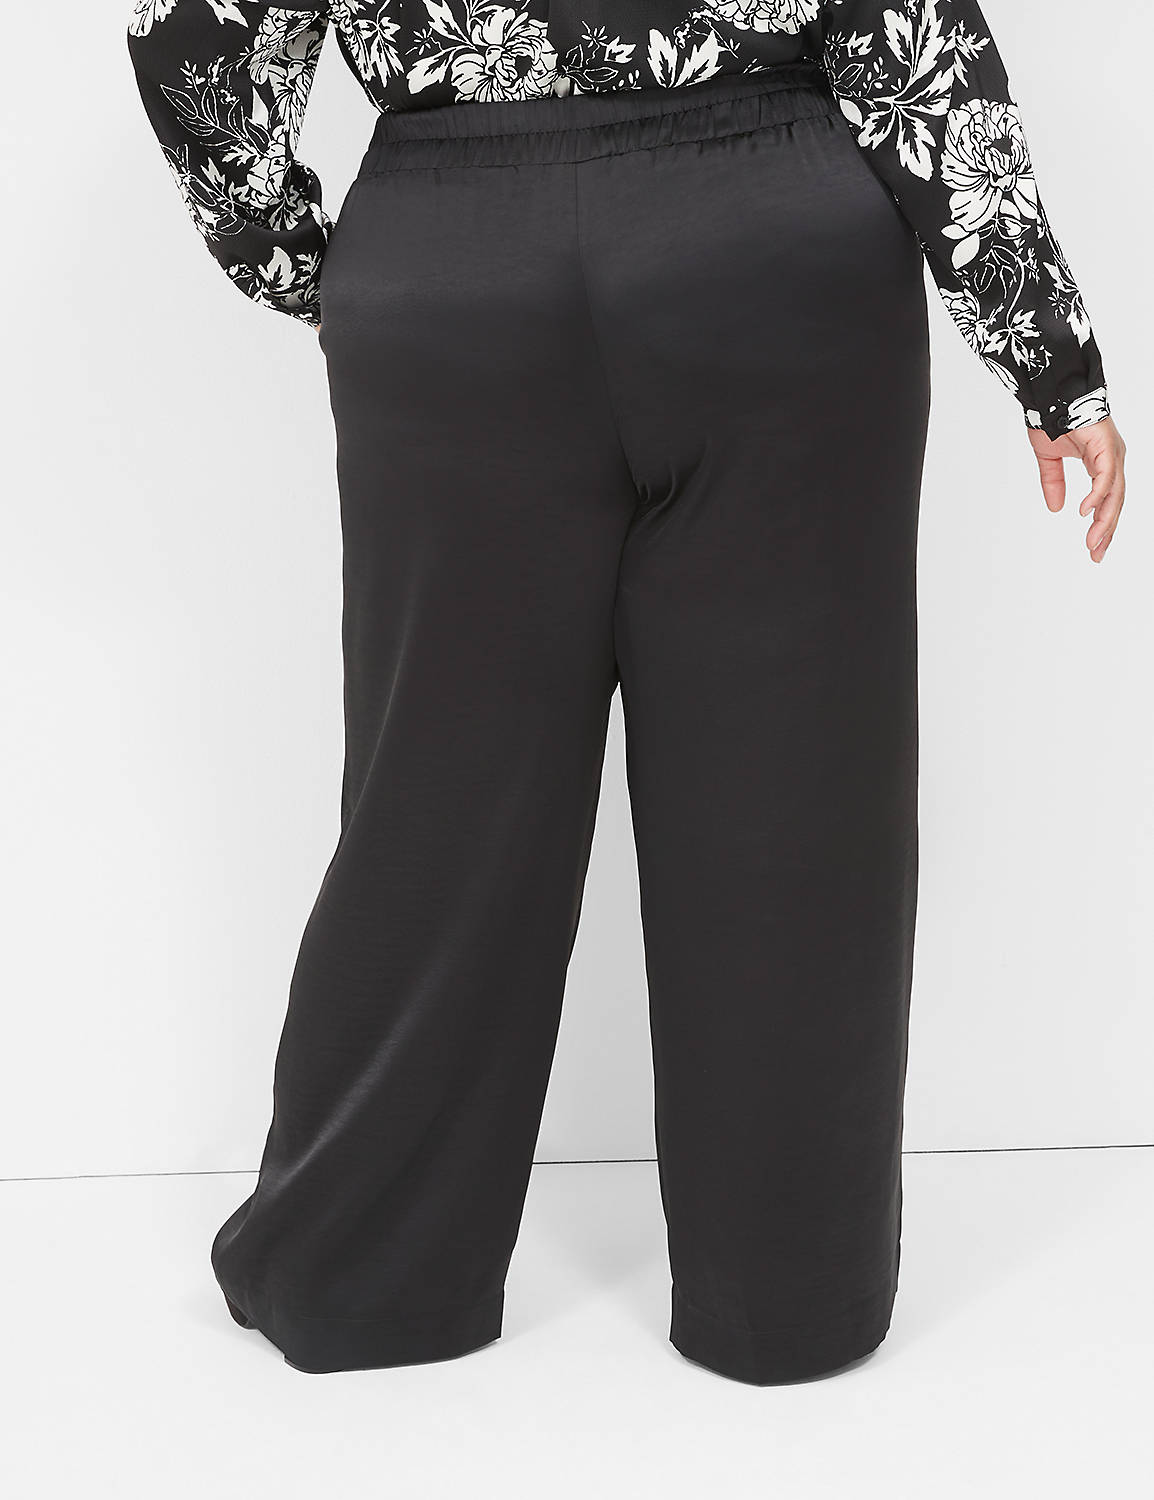 THE PLEATED SATIN PULLON WIDELEG 11 Product Image 2